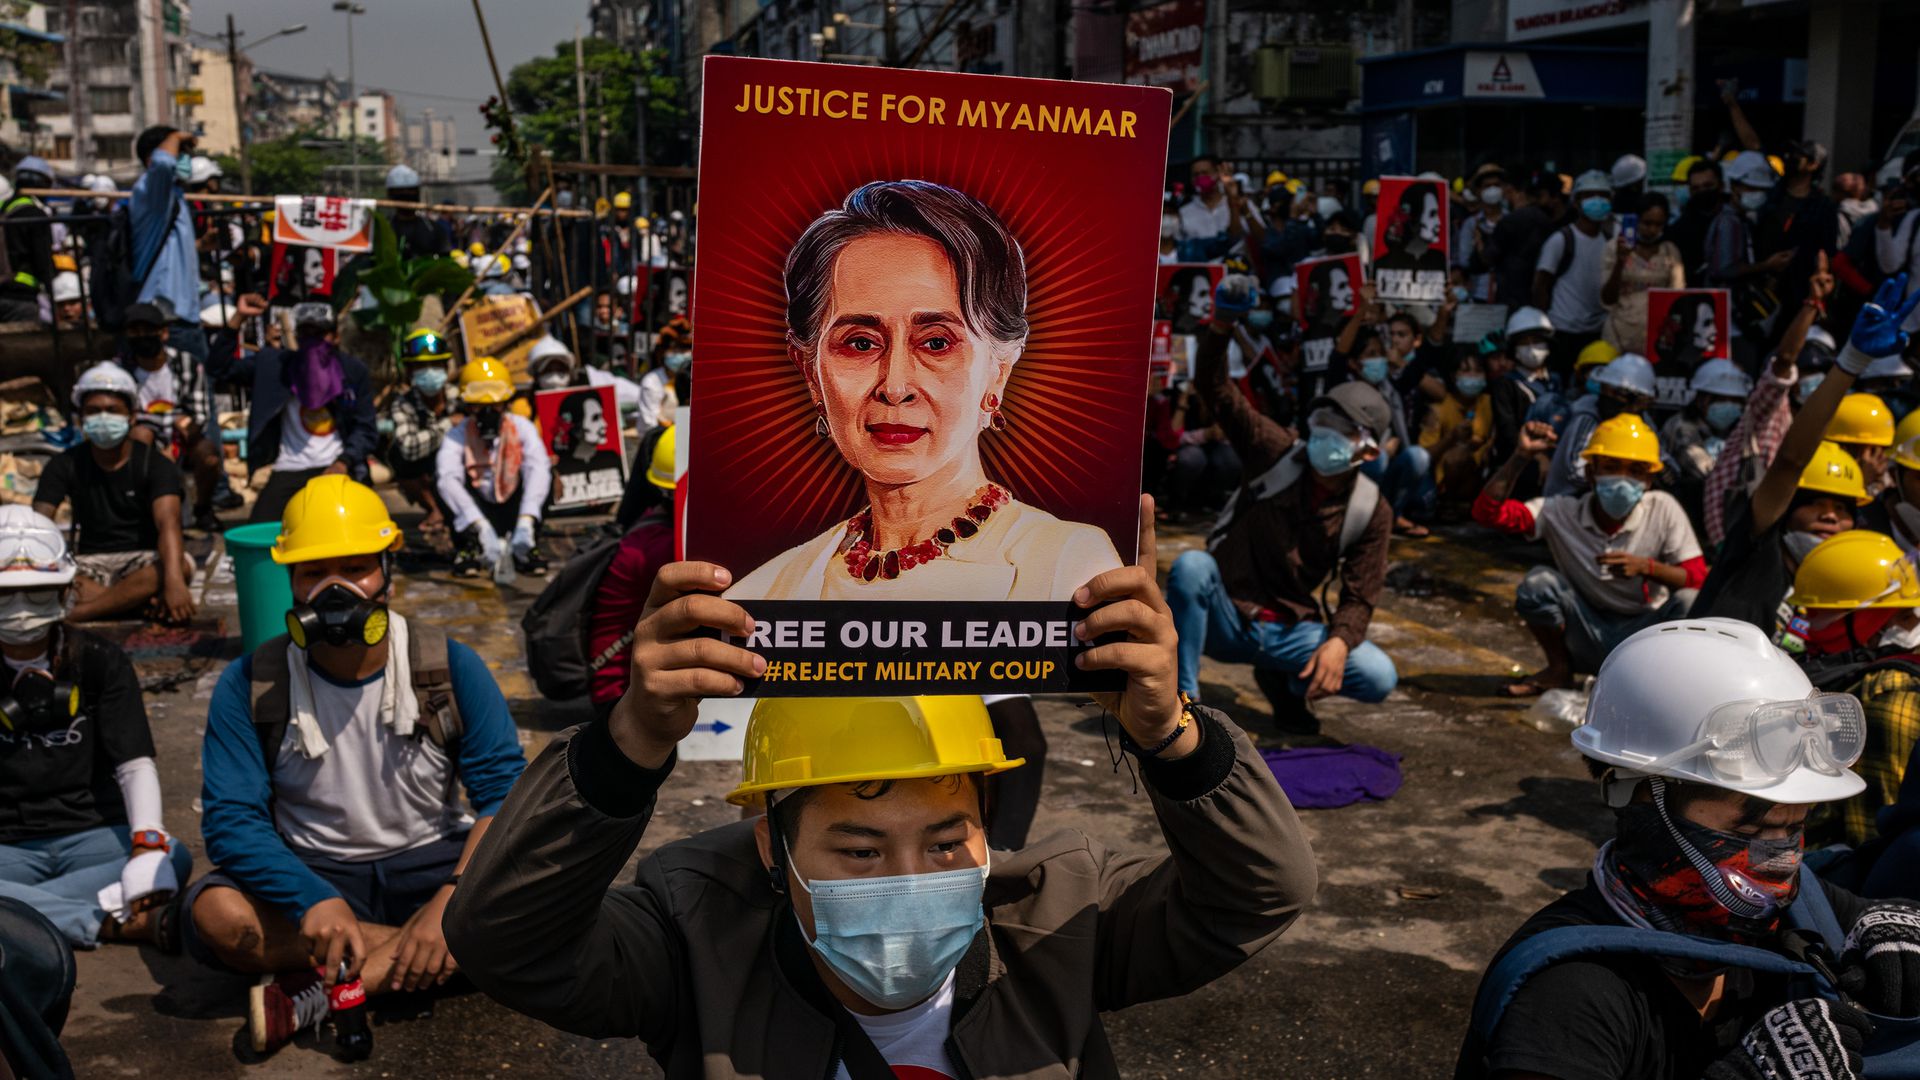 Suu Kyi handed down four years in prison